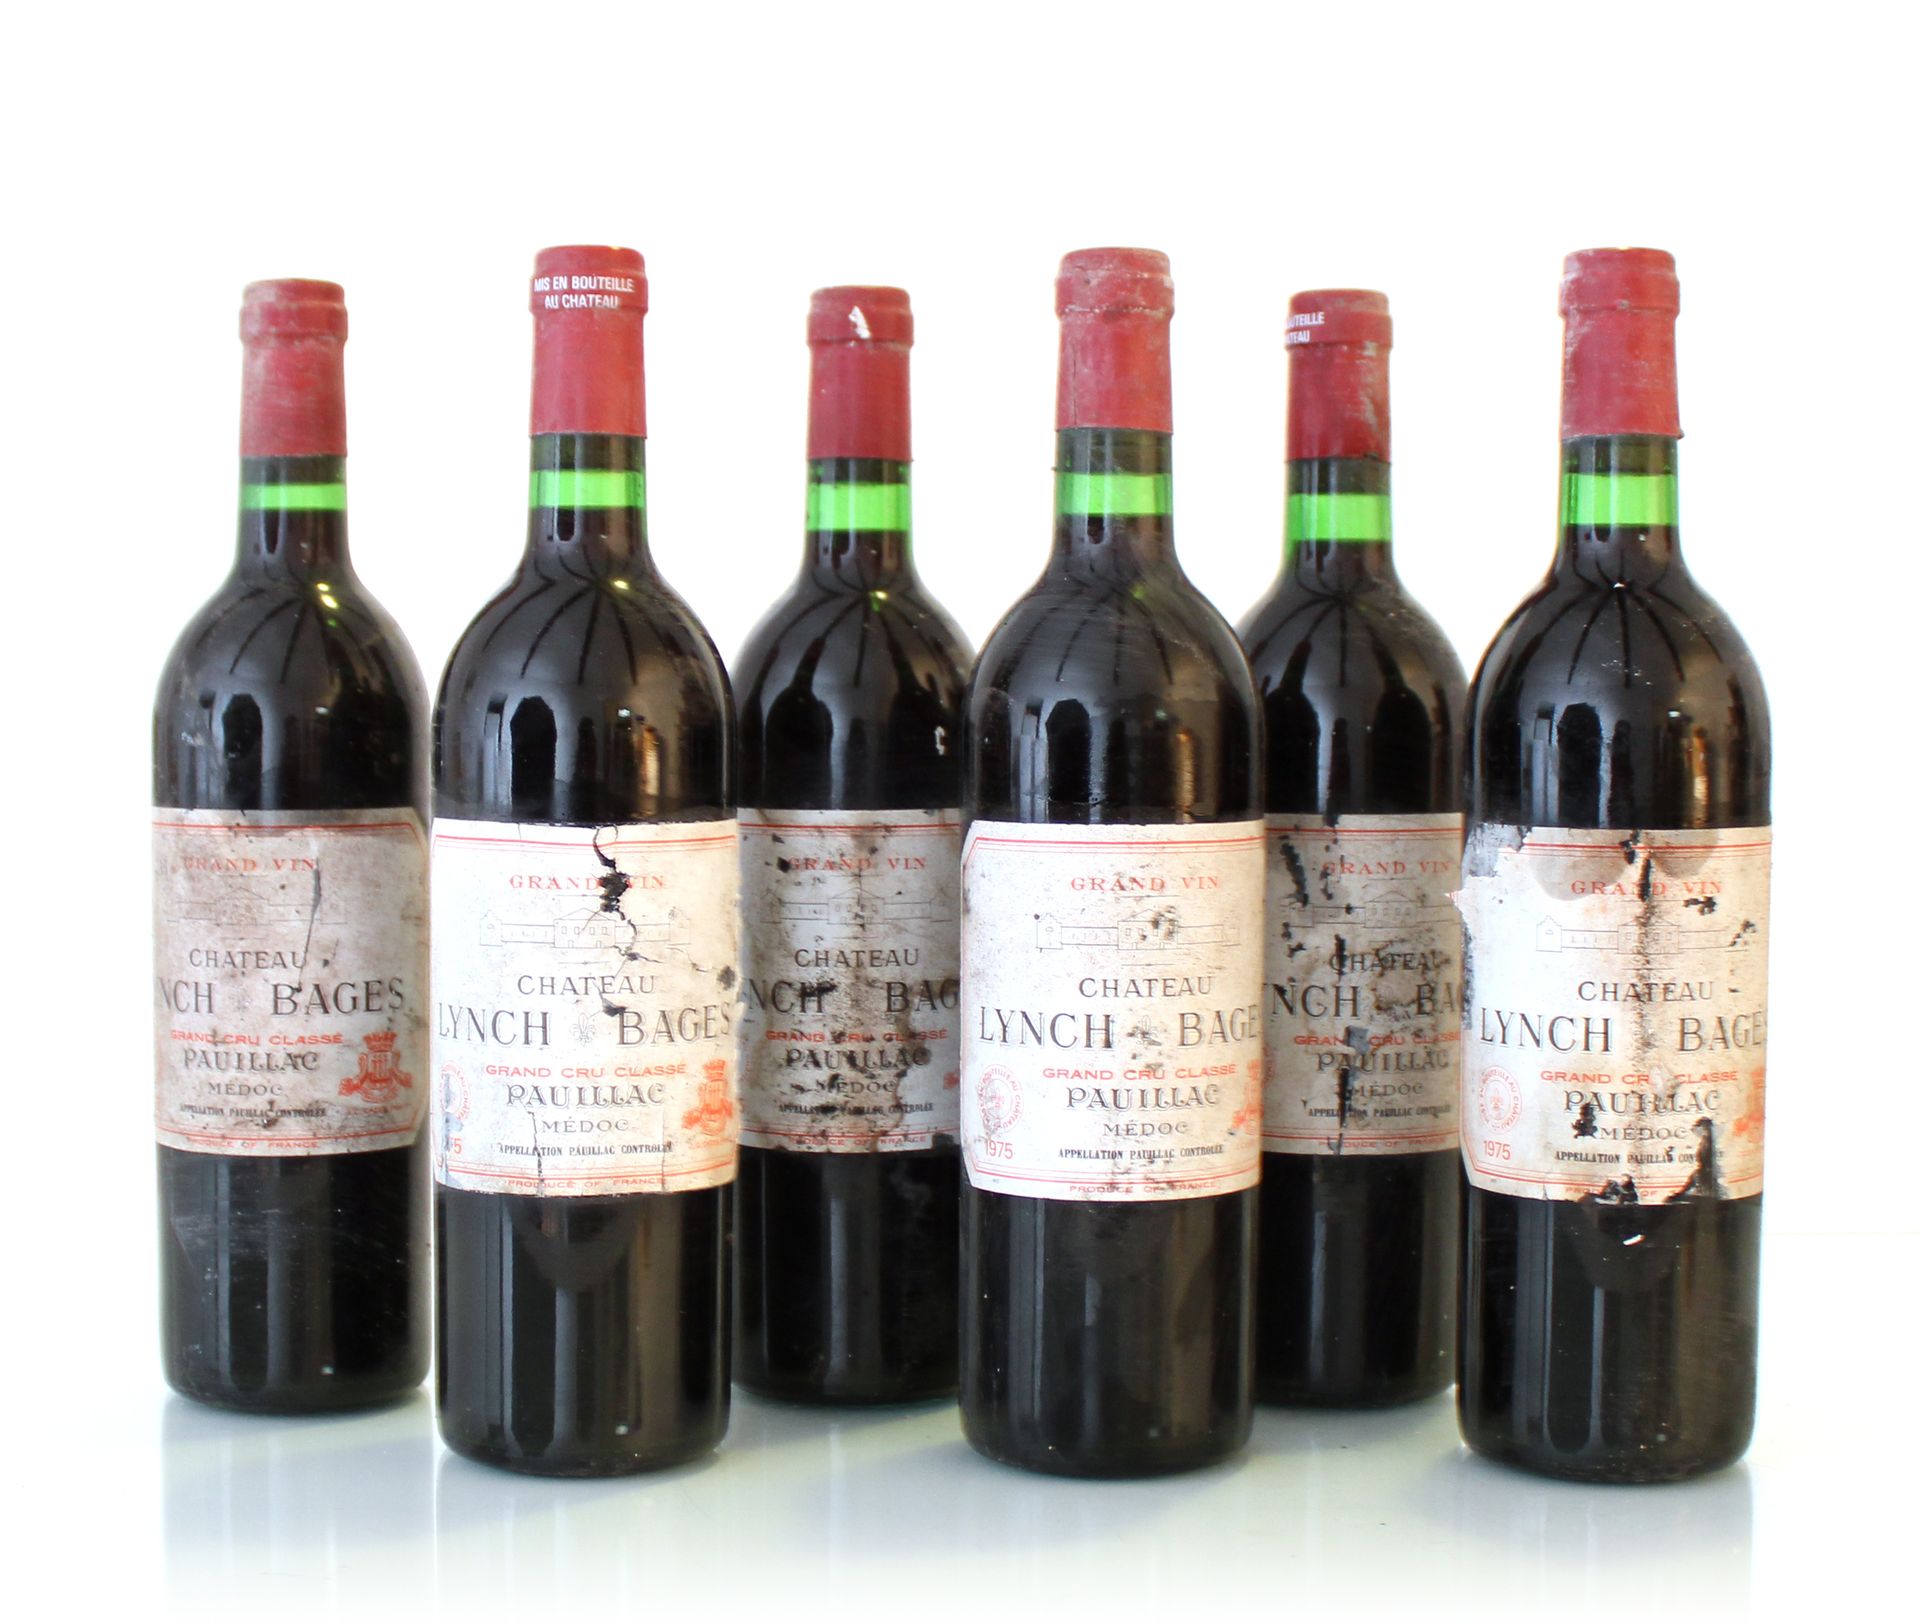 Null 6瓶CHÂTEAU LYNCH BAGES

年份 : 1975年

产地：GCC5 PAUILLAC

备注：（对B.G；e.F.S和e.T.A；c&hellip;